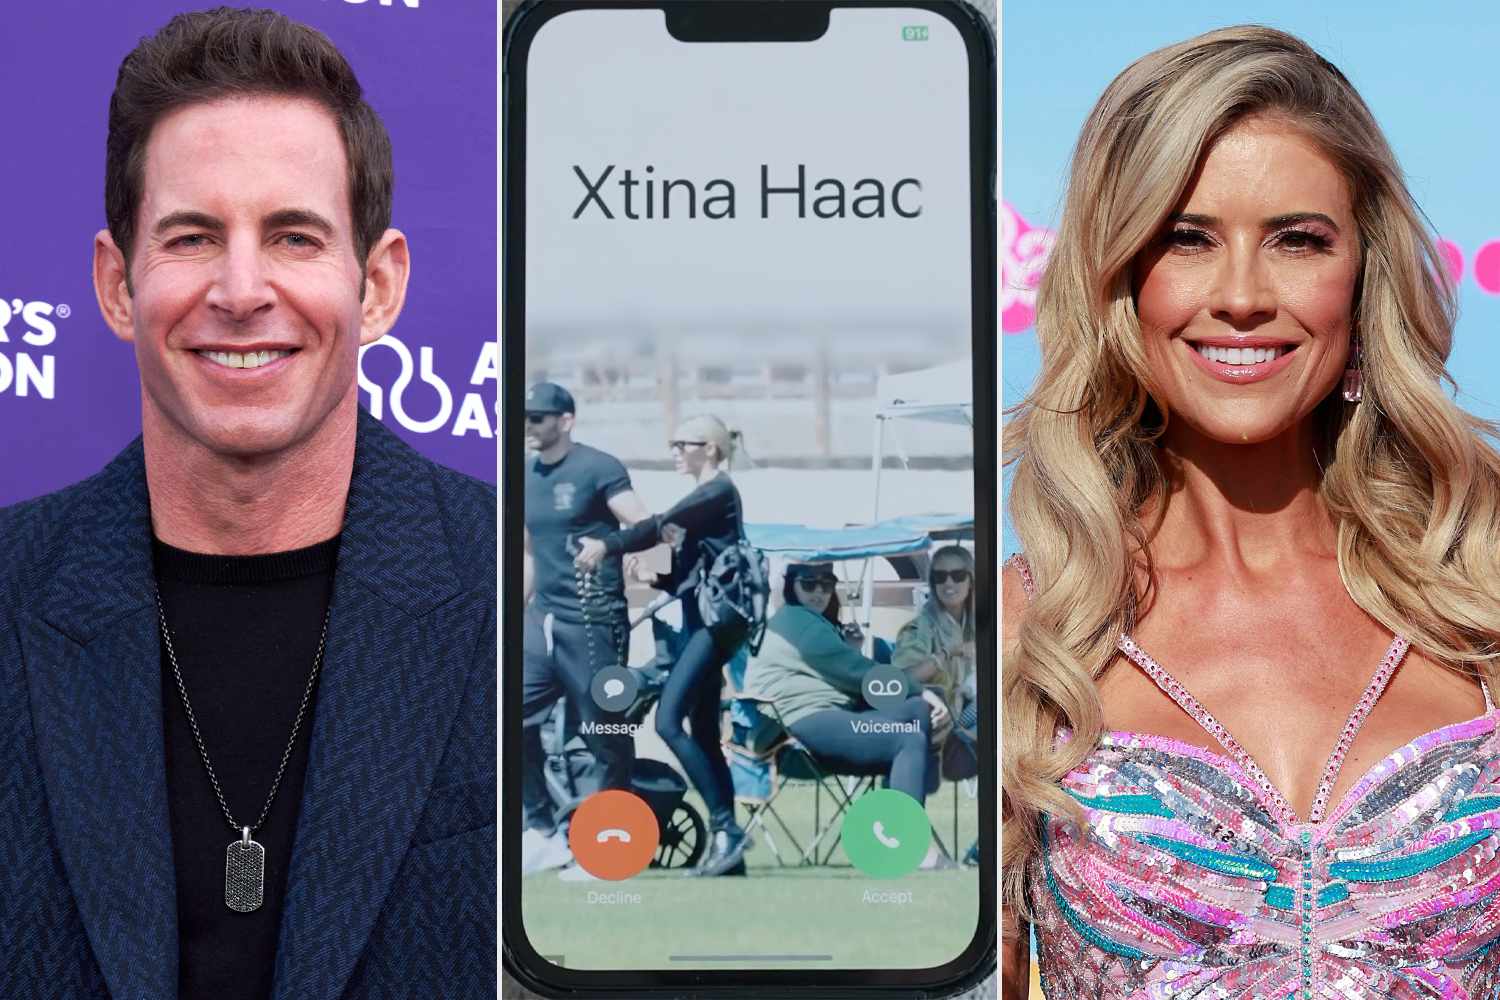 Tarek El Moussa References Infamous Argument with Ex Christina Hall at Soccer Game in Promo for Their New Show